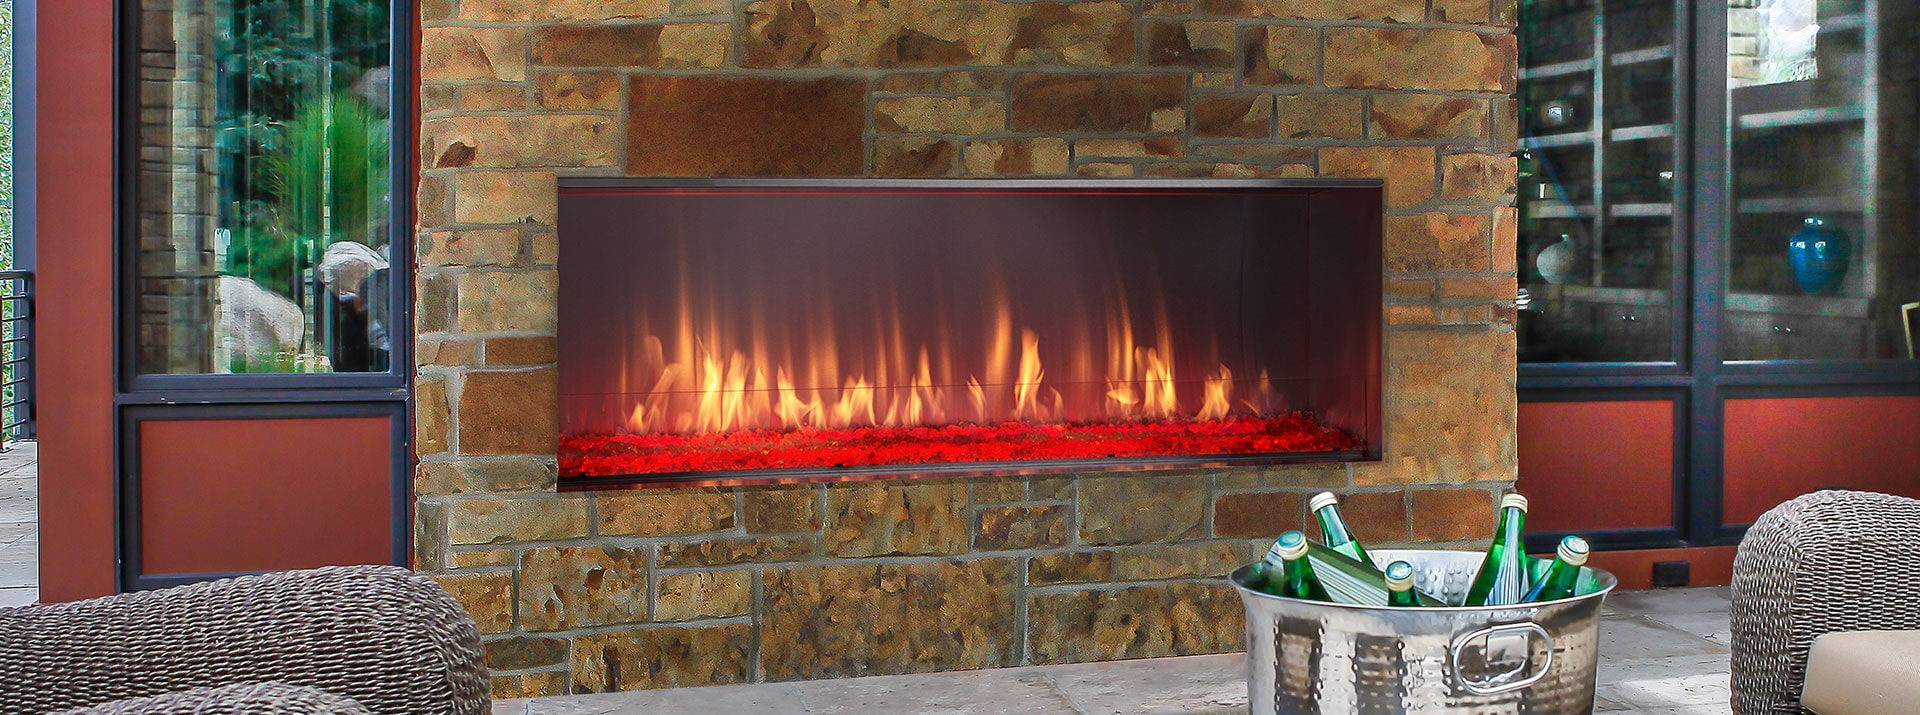 Best Paint for Brick Fireplace New Lanai Gas Outdoor Fireplace